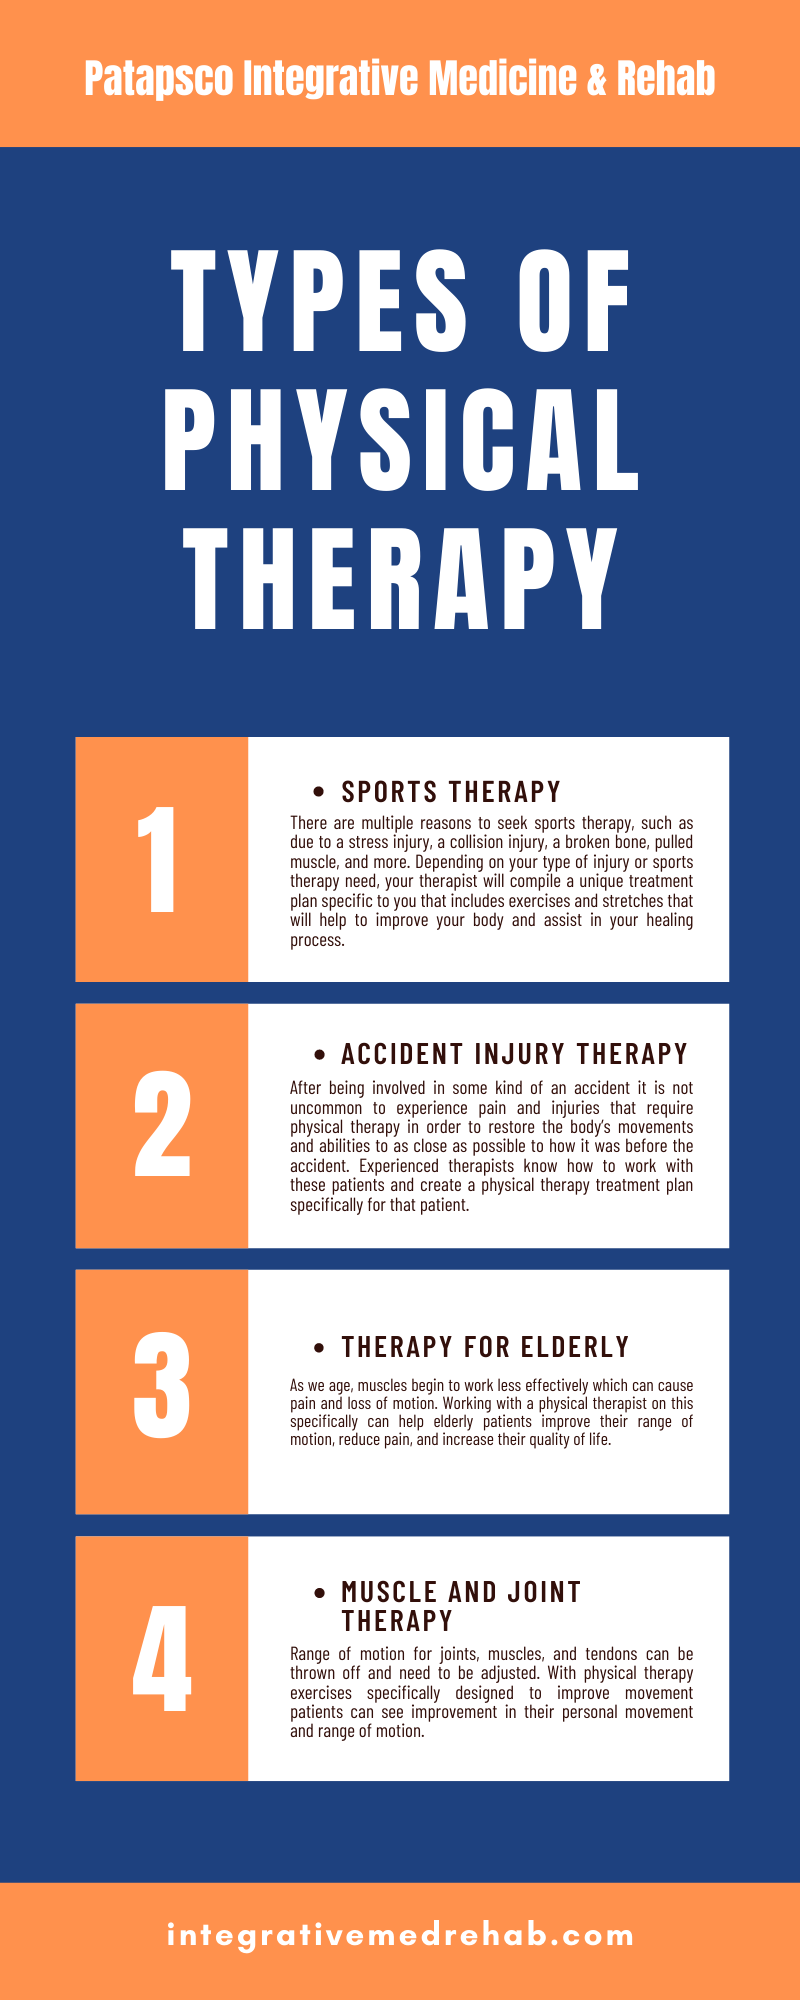 TYPES OF PHYSICAL THERAPY INFOGRAPHIC